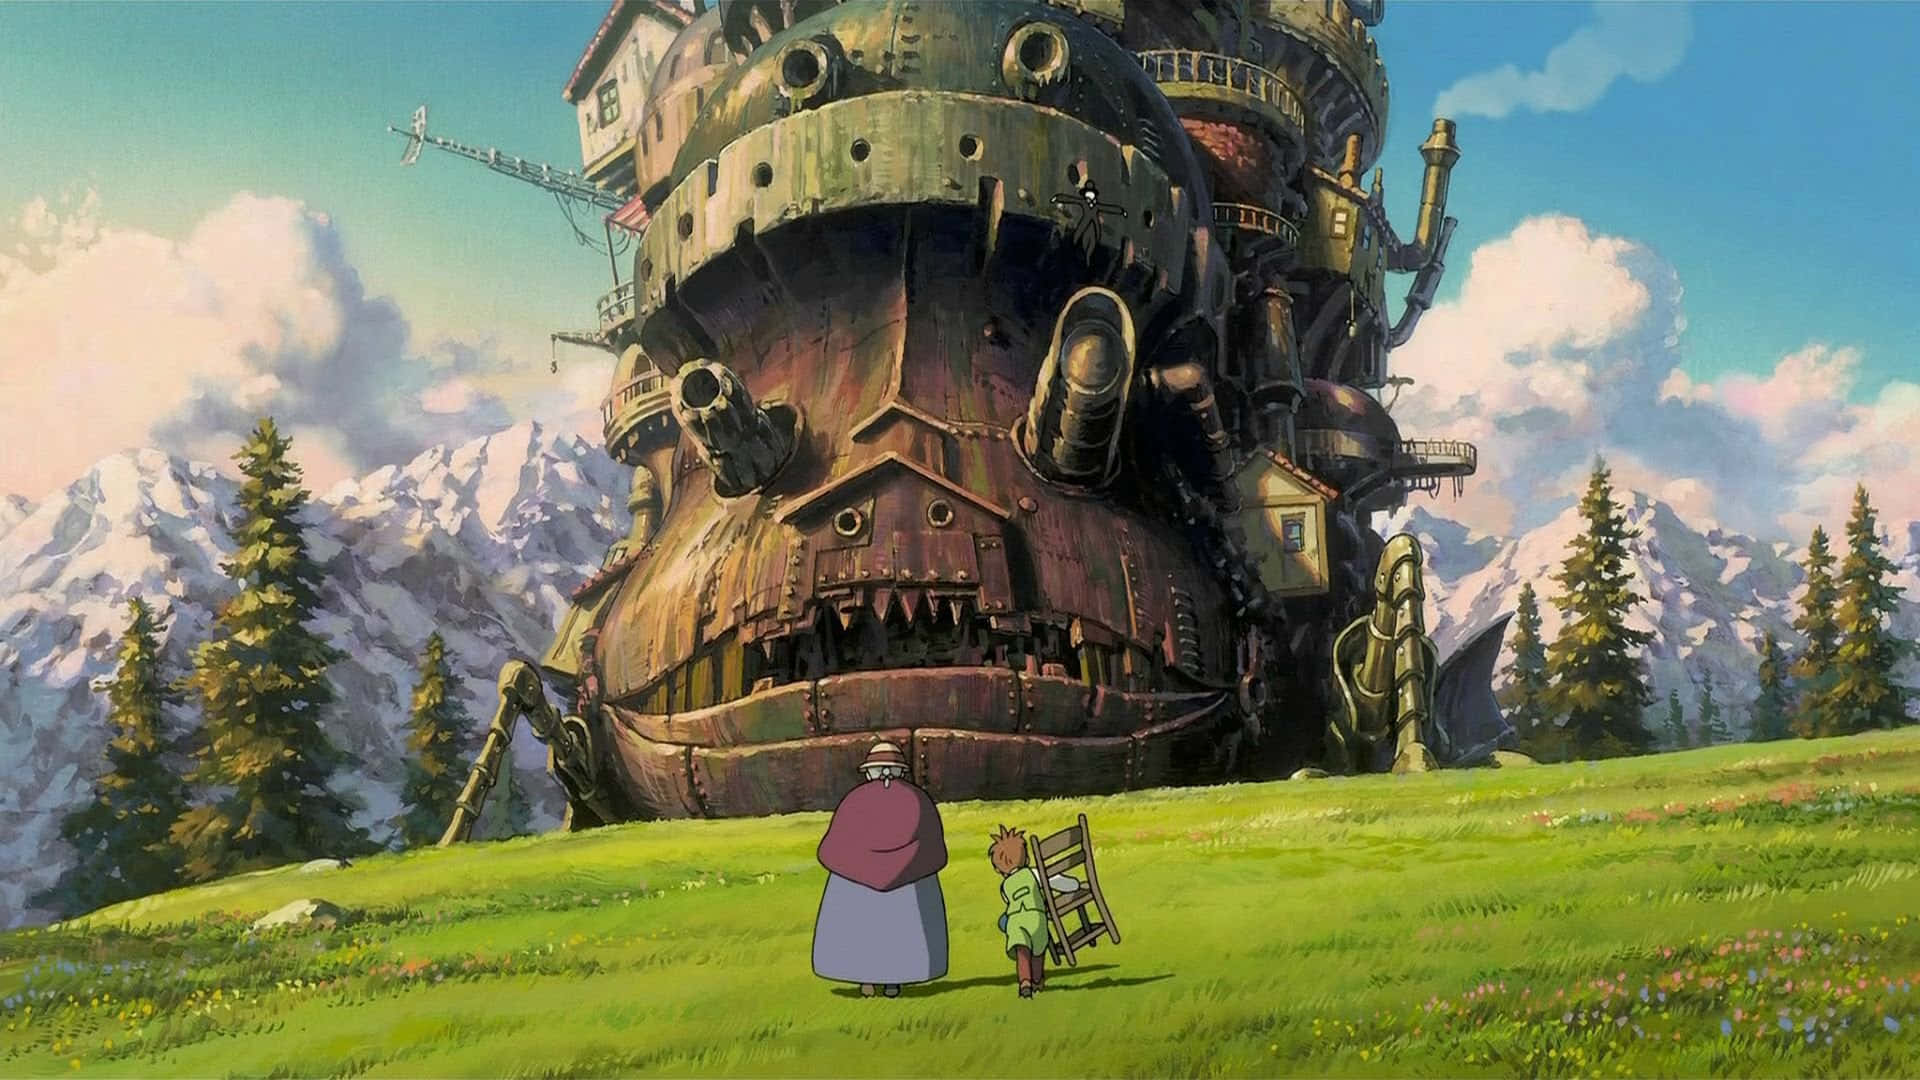 Sophie and Howl from "Howl's Moving Castle"